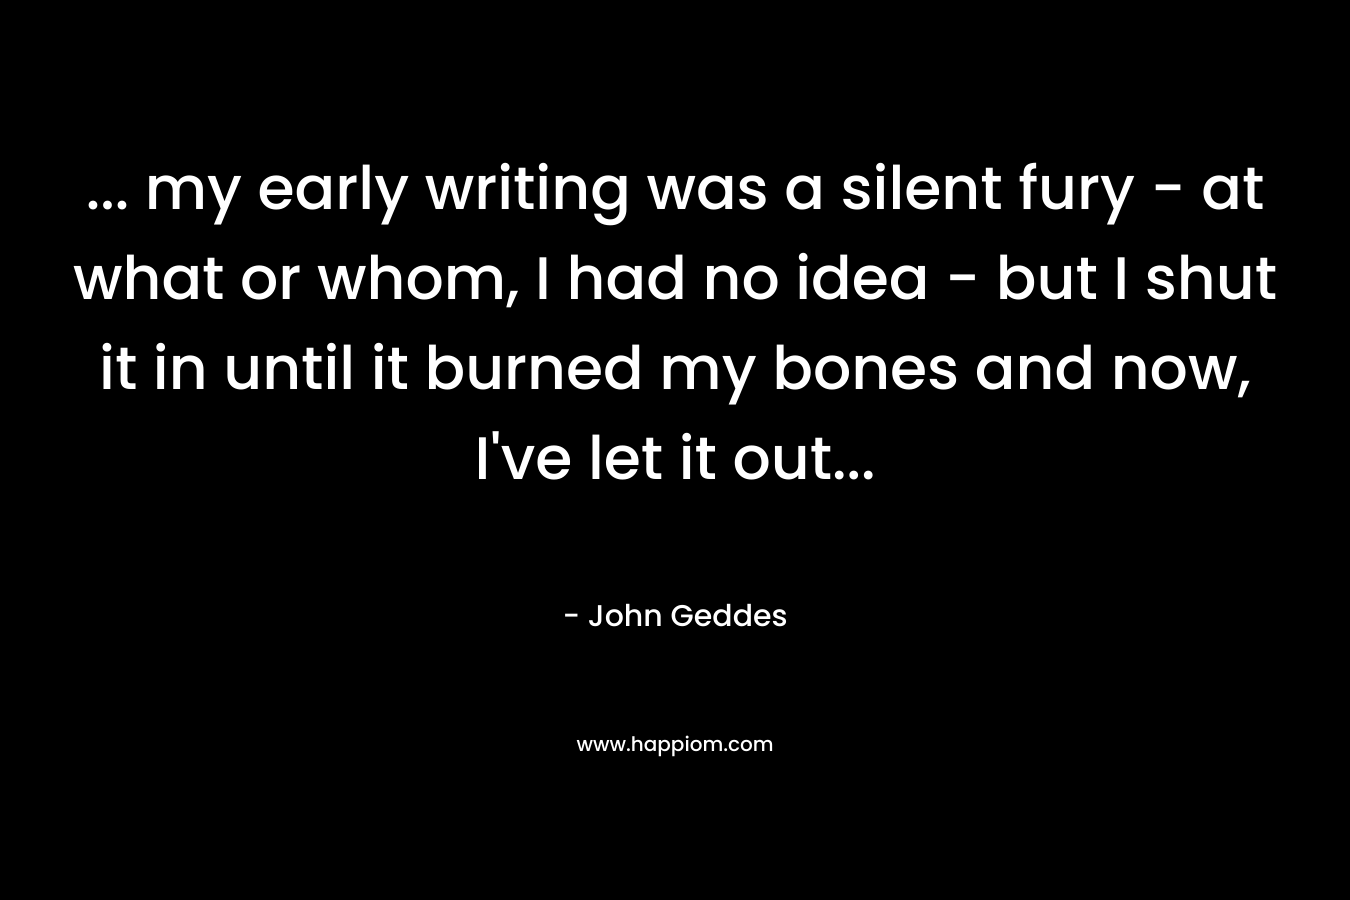 ... my early writing was a silent fury - at what or whom, I had no idea - but I shut it in until it burned my bones and now, I've let it out...